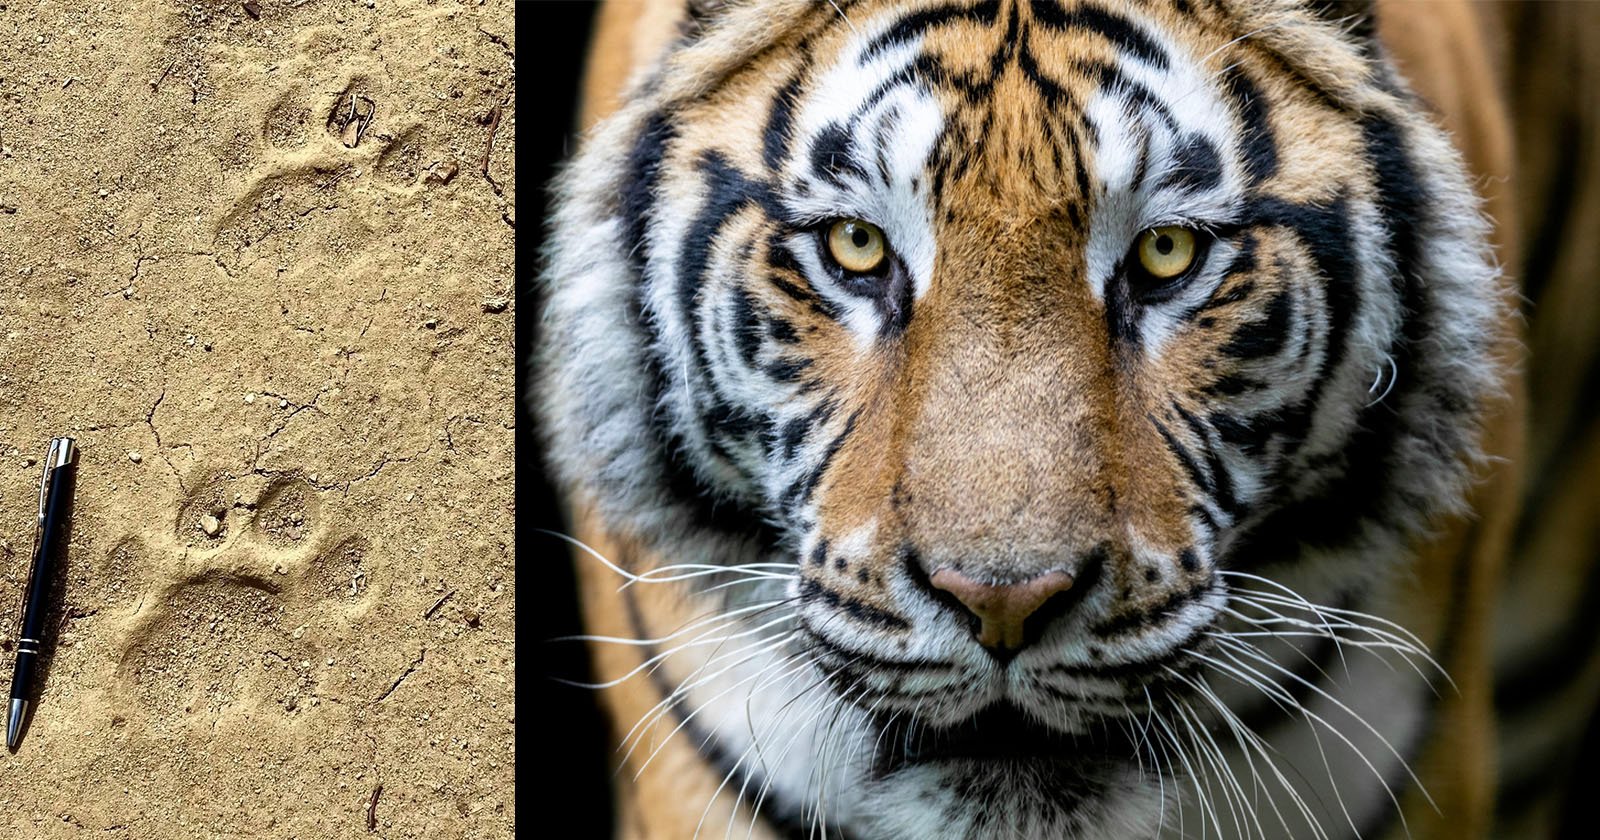 In One Tiger-Infested Village, AI Trail Cameras are Keeping People Safe